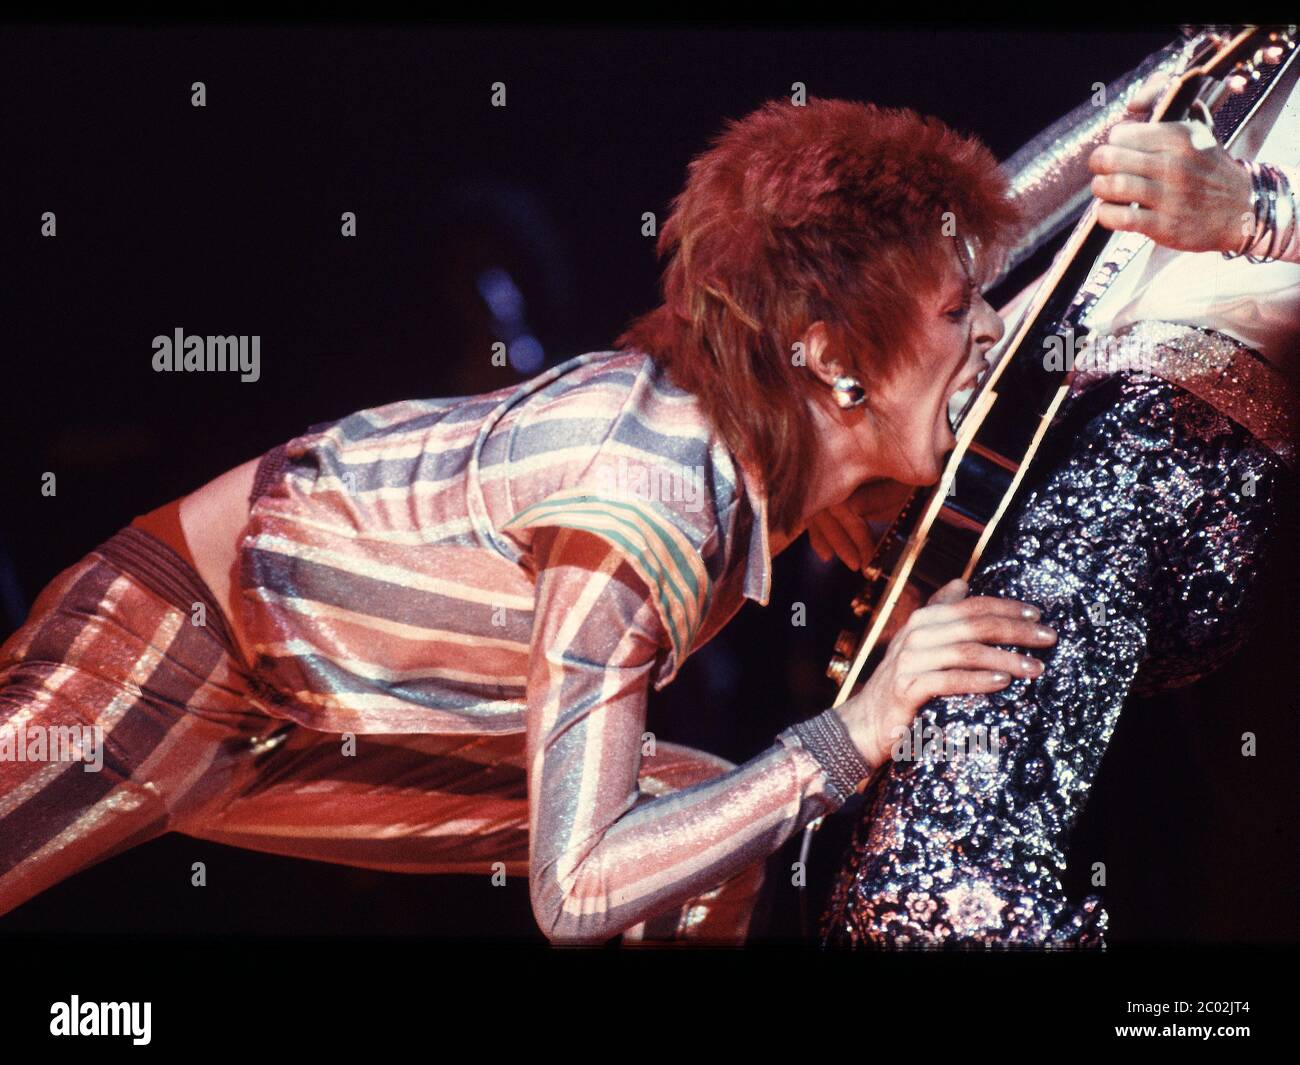 David Bowie as Ziggy Stardust in concert at Earl's Court Exhibition Hall,London 12th May 1973 Stock Photo